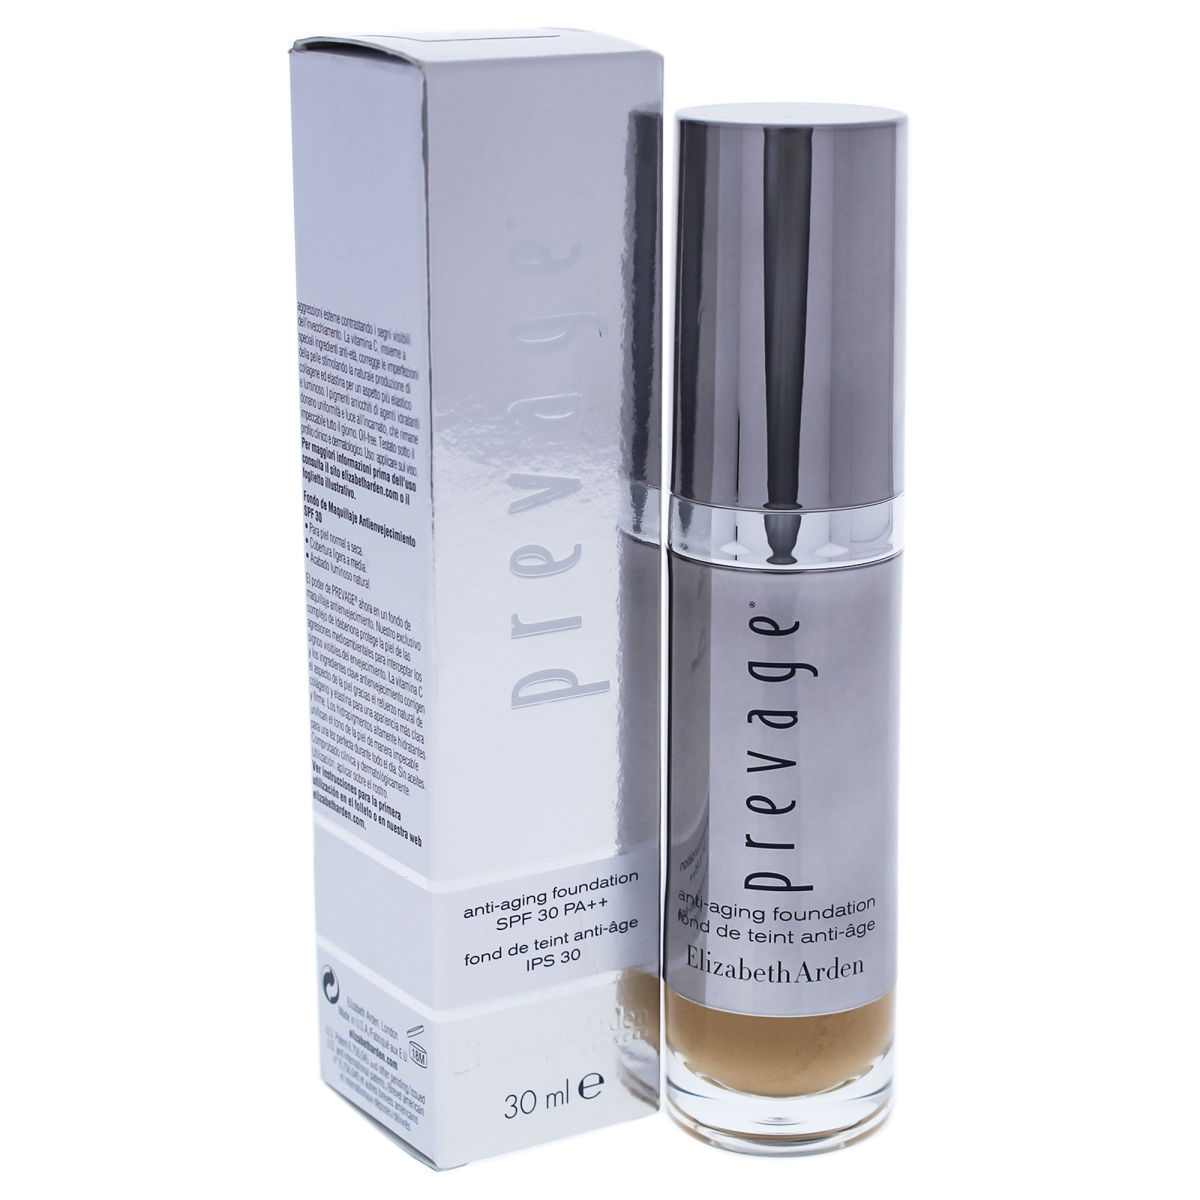 I0087509 1 Oz Prevage Anti-aging Foundation Spf 30 Foundation For Womens - 07 Shade